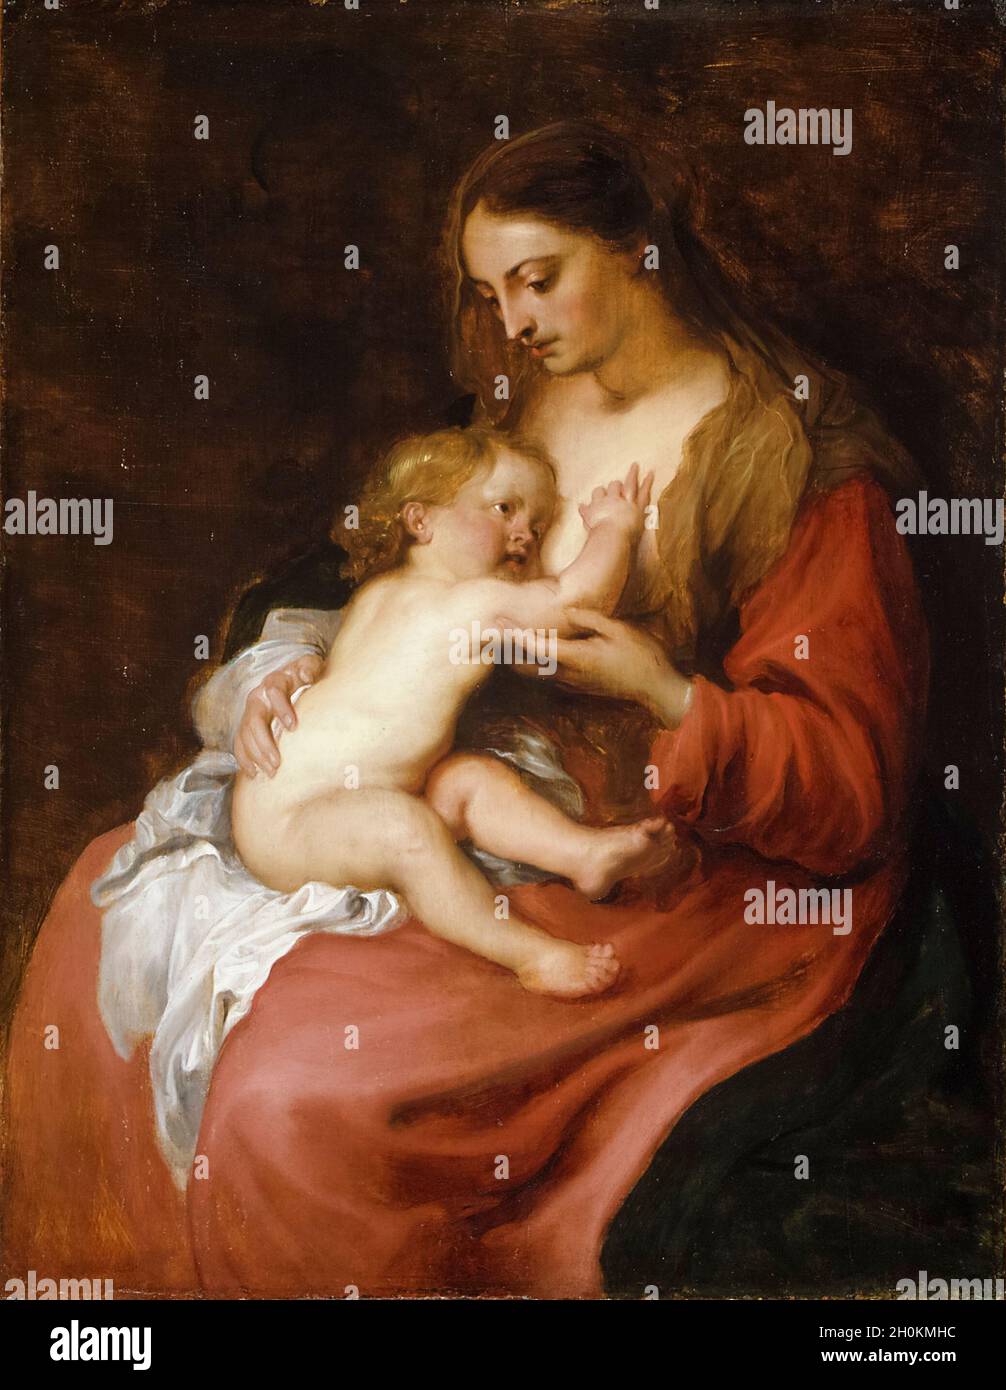 Anthony van Dyck, Virgin and Child, Painting, 1620 Foto Stock